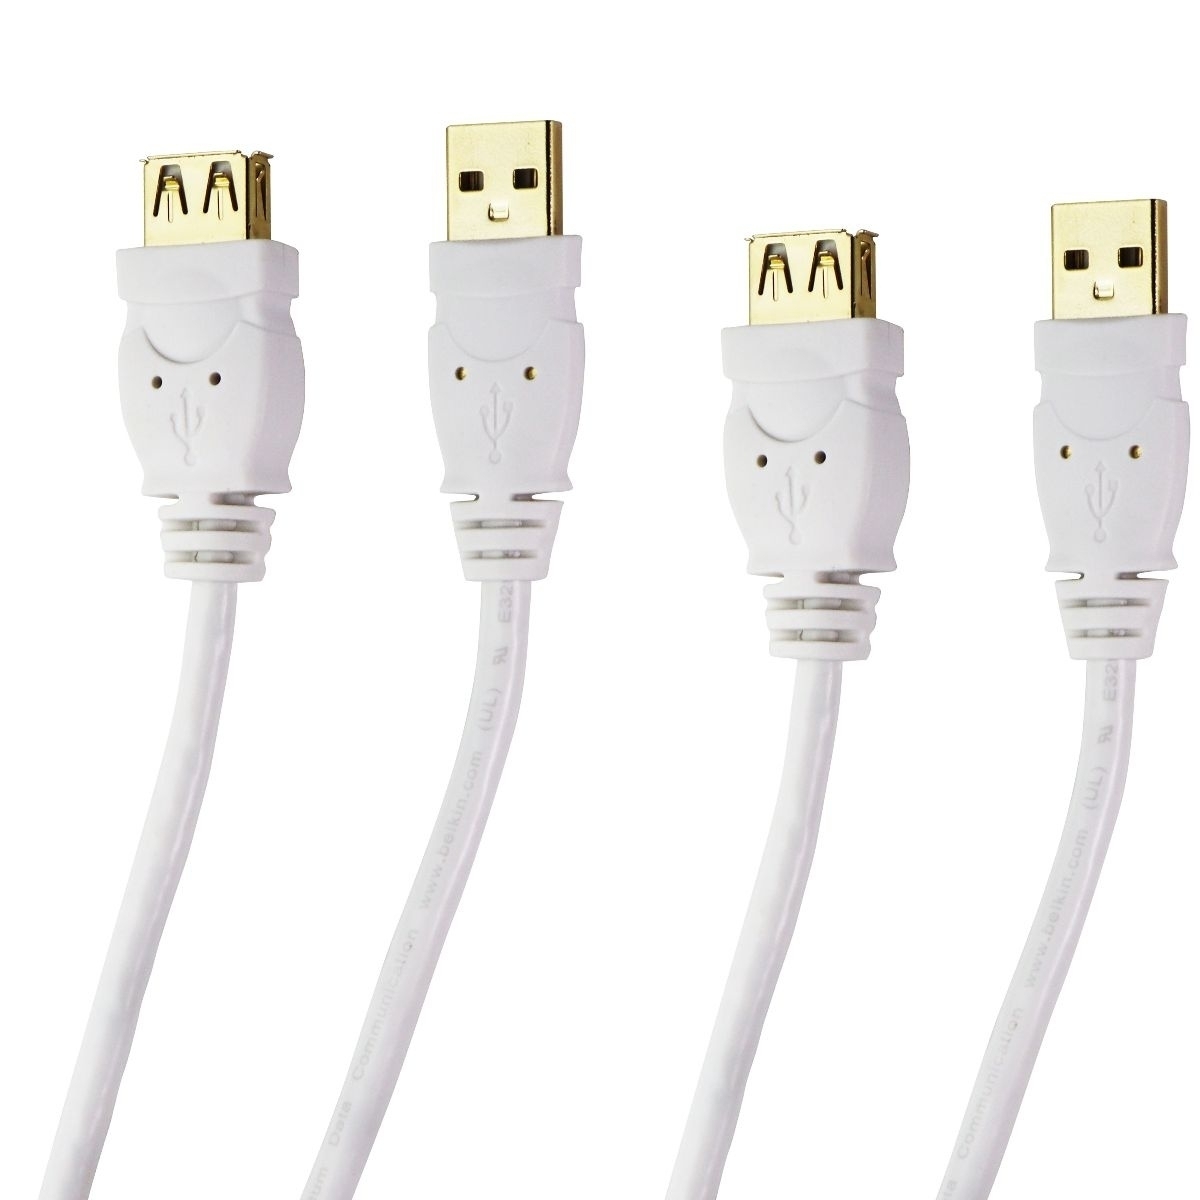 2x Belkin (HA154ZM/A) Extension Data Cables For USB Devices - White